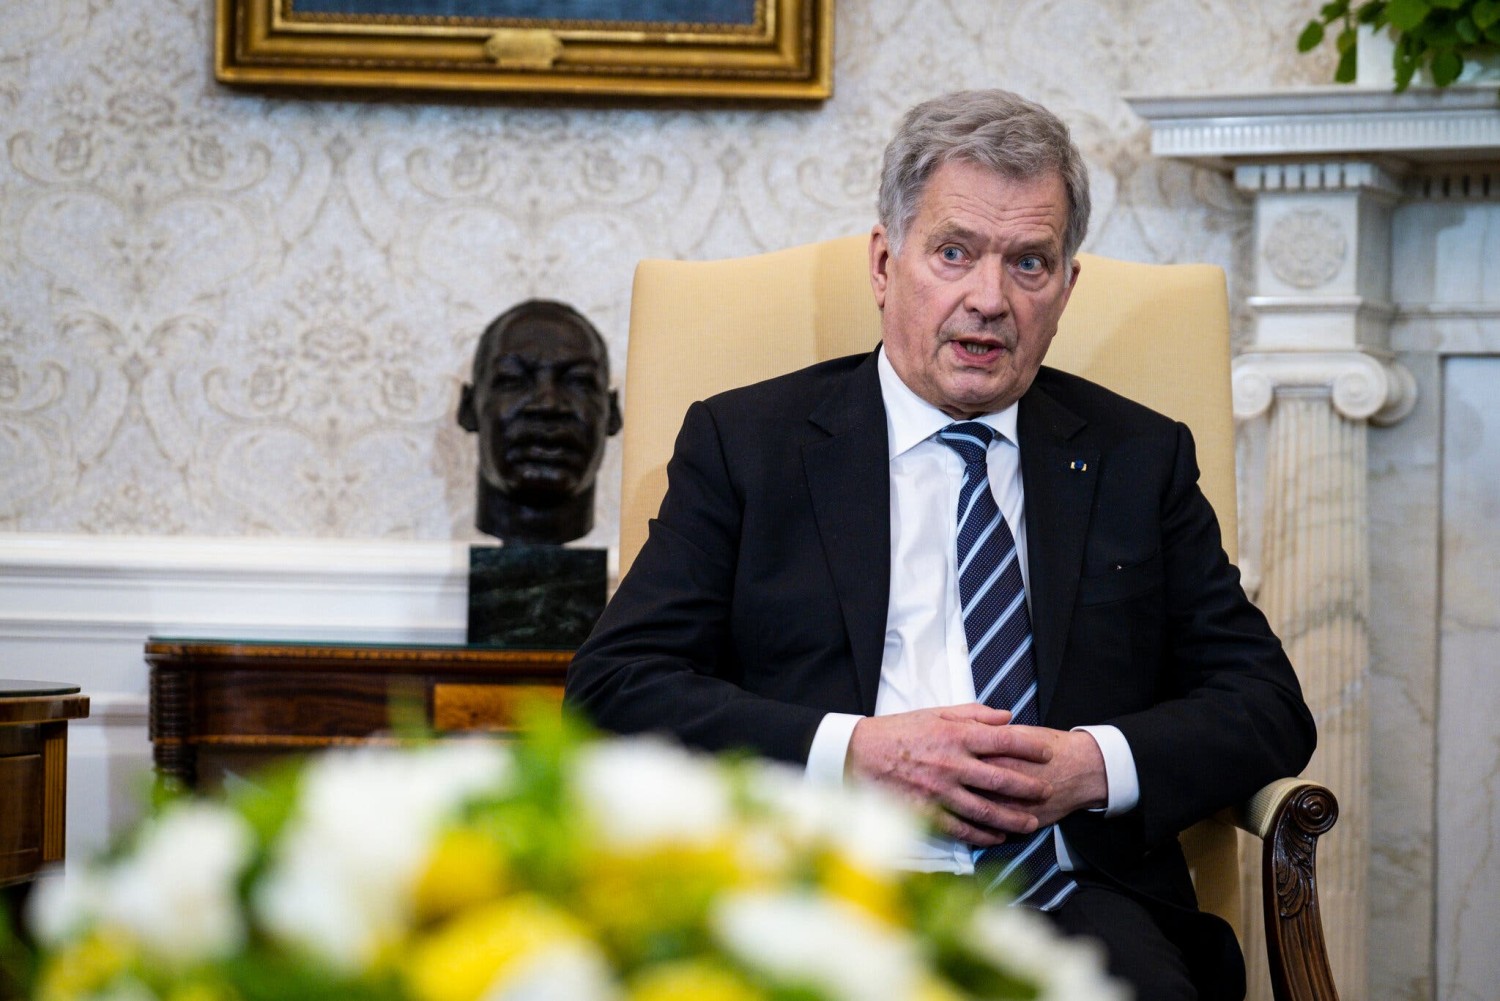 Finland’s President, No Stranger to Russia, Warns Europe About Complacency